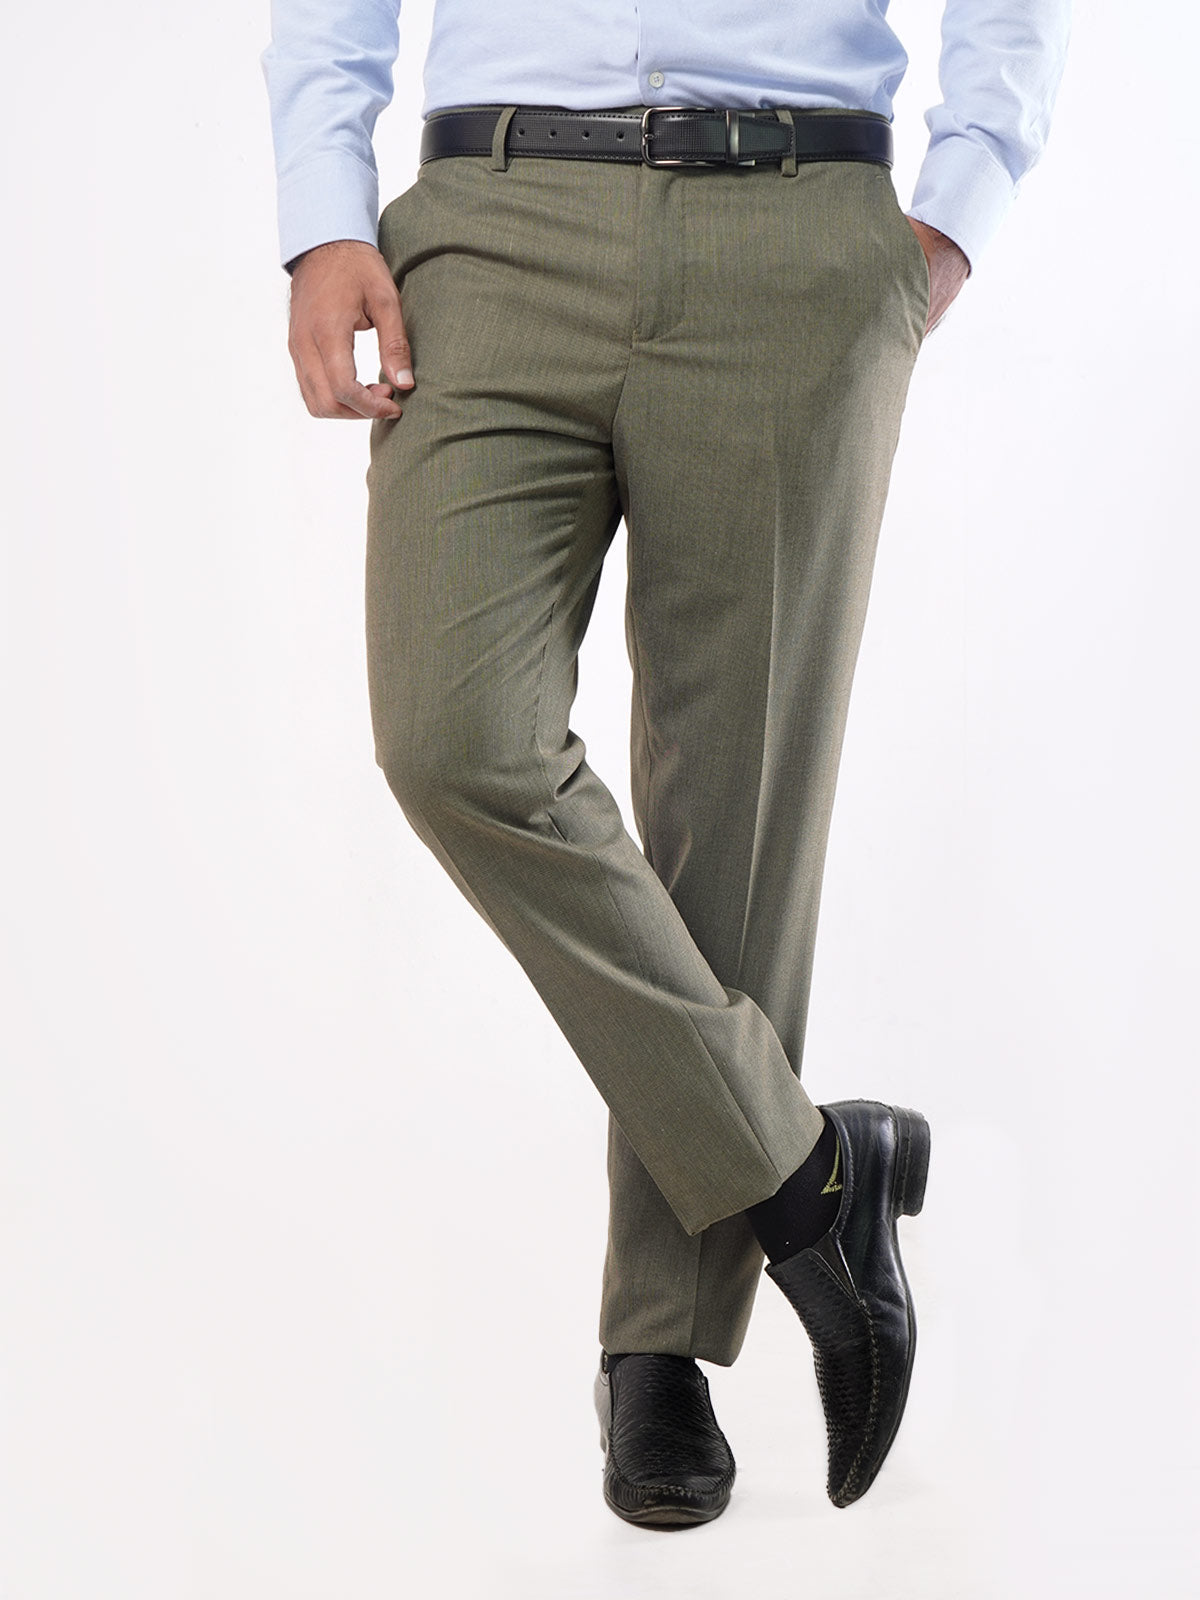 Green & Olive Pants | Pants outfit men, Green pants outfit, Olive pants